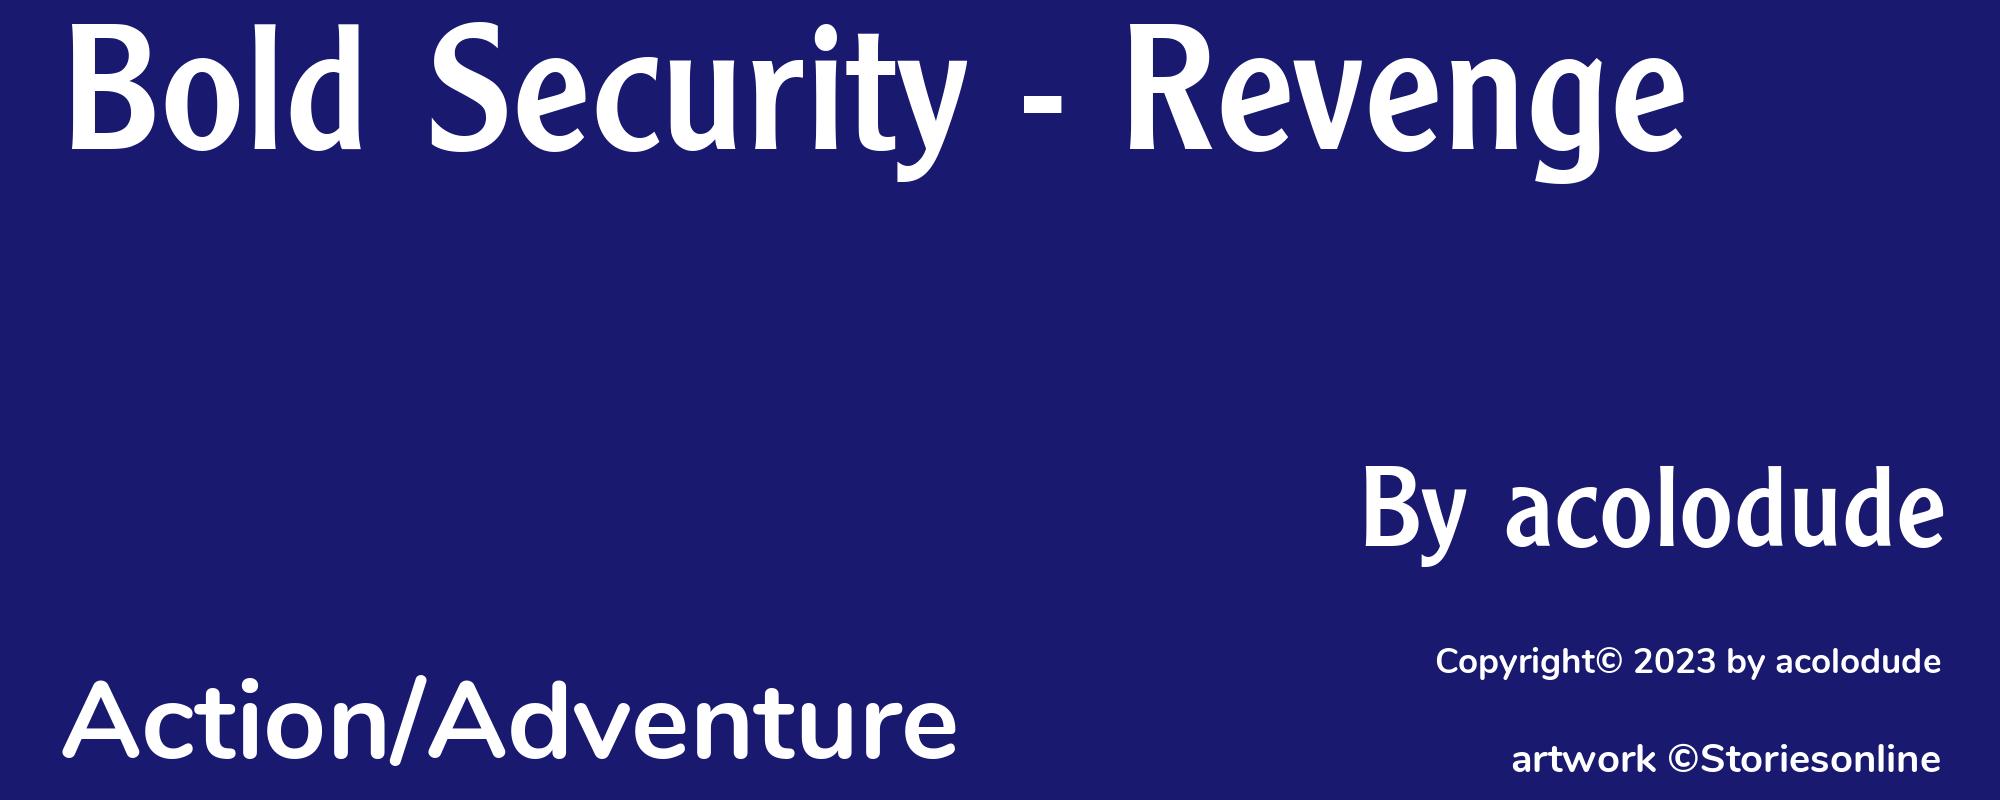 Bold Security - Revenge - Cover